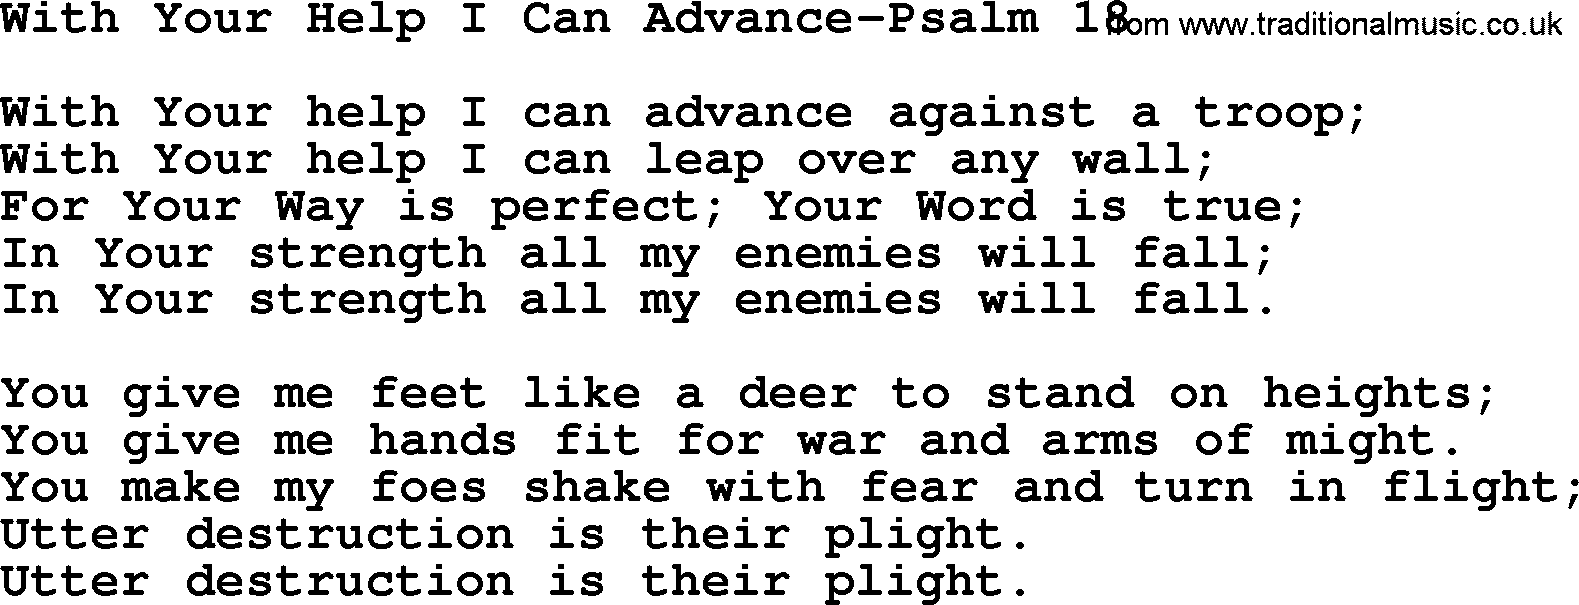 Hymns from the Psalms, Hymn: With Your Help I Can Advance-Psalm 18, lyrics with PDF